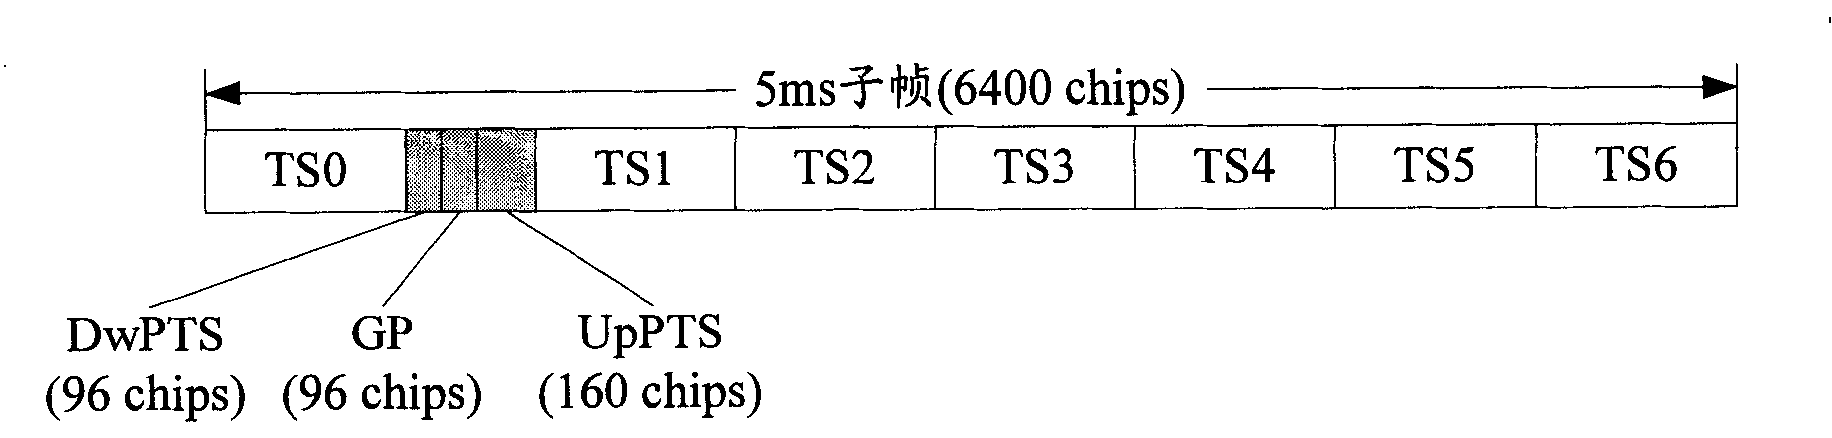 Synchronous method for wideband time division duplex cellular system